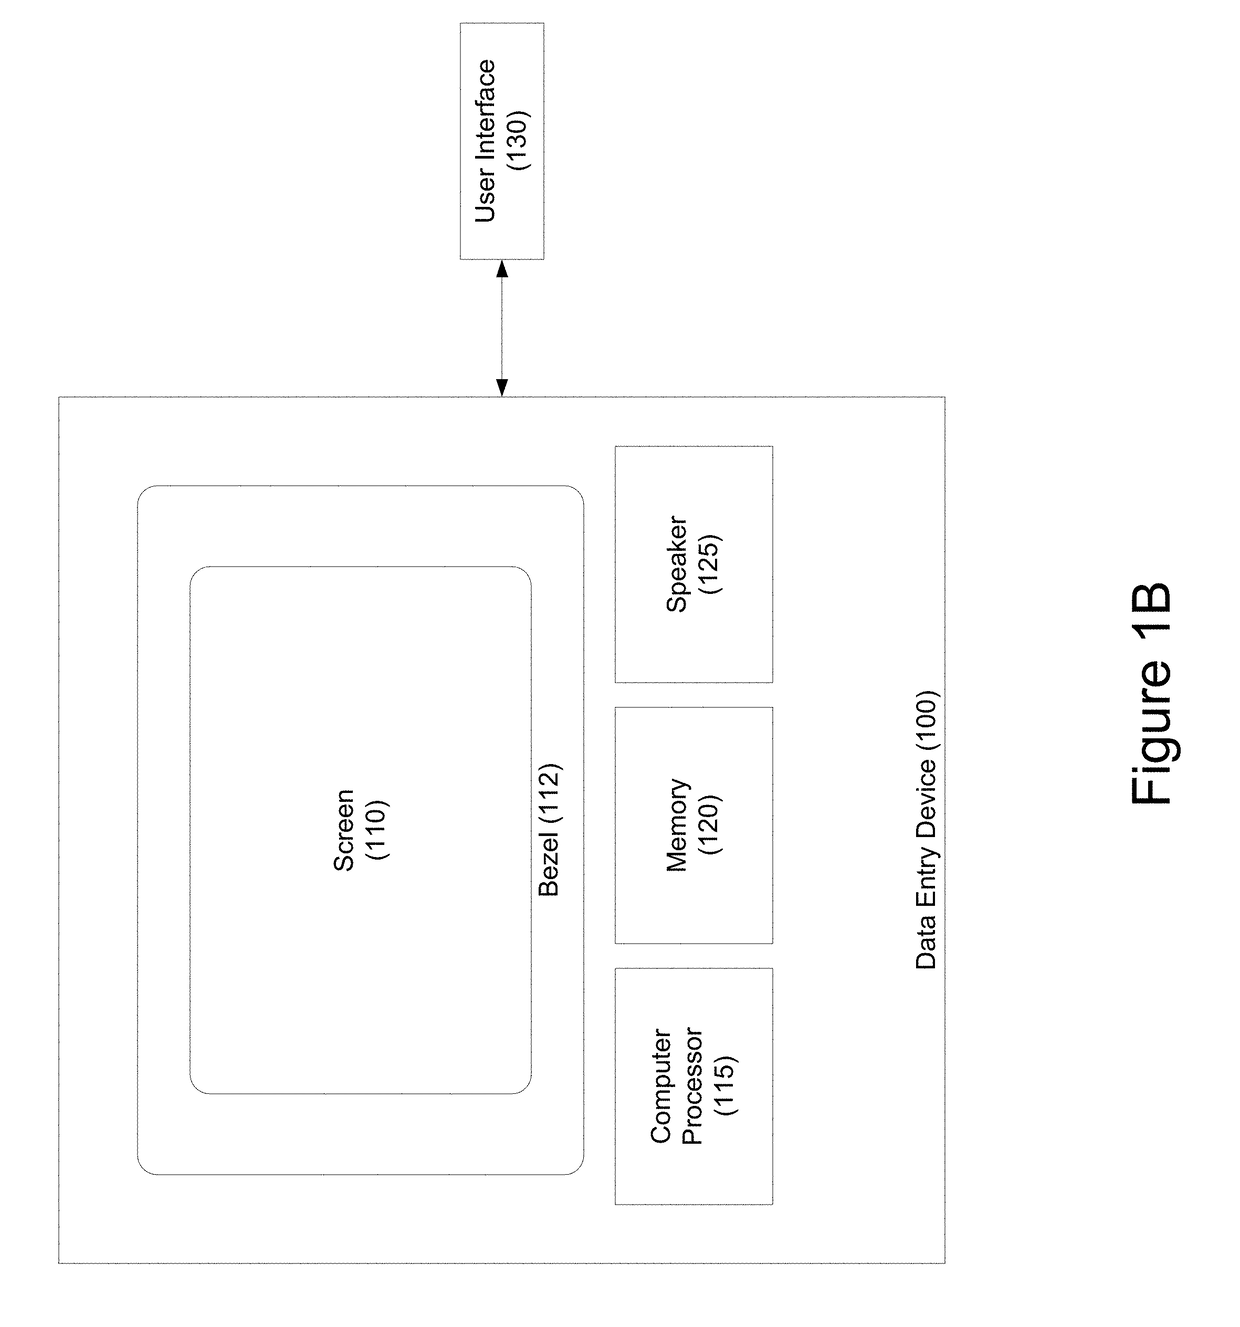 Systems and methods for authentication code entry in touch-sensitive screen enabled devices